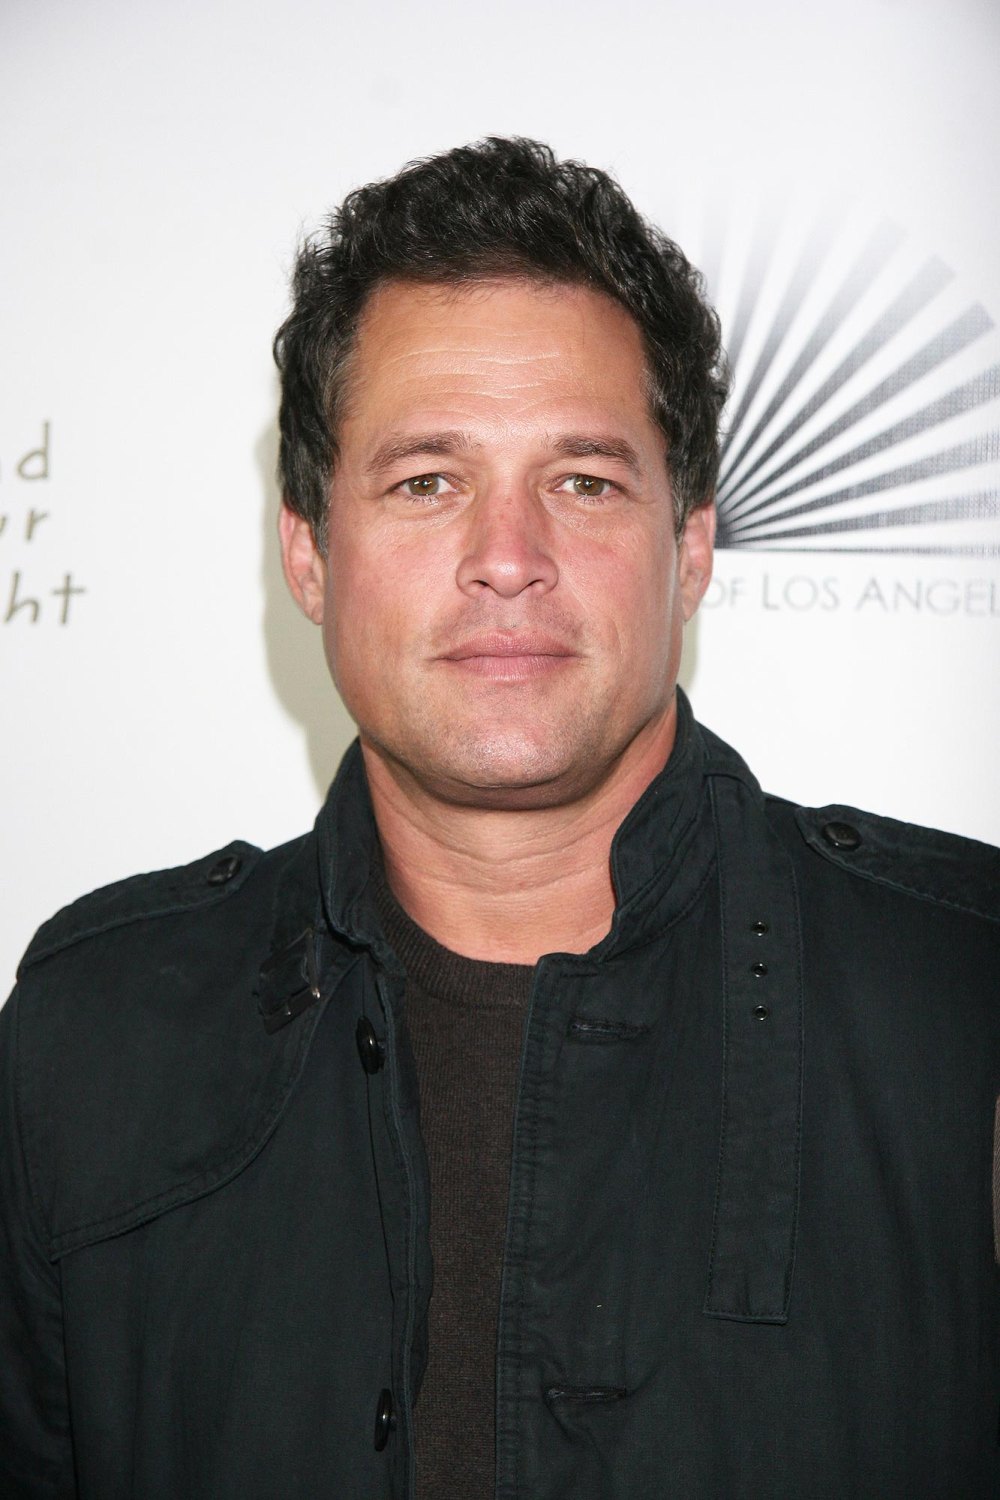 90210 Star David Gales Cause of Death Revealed